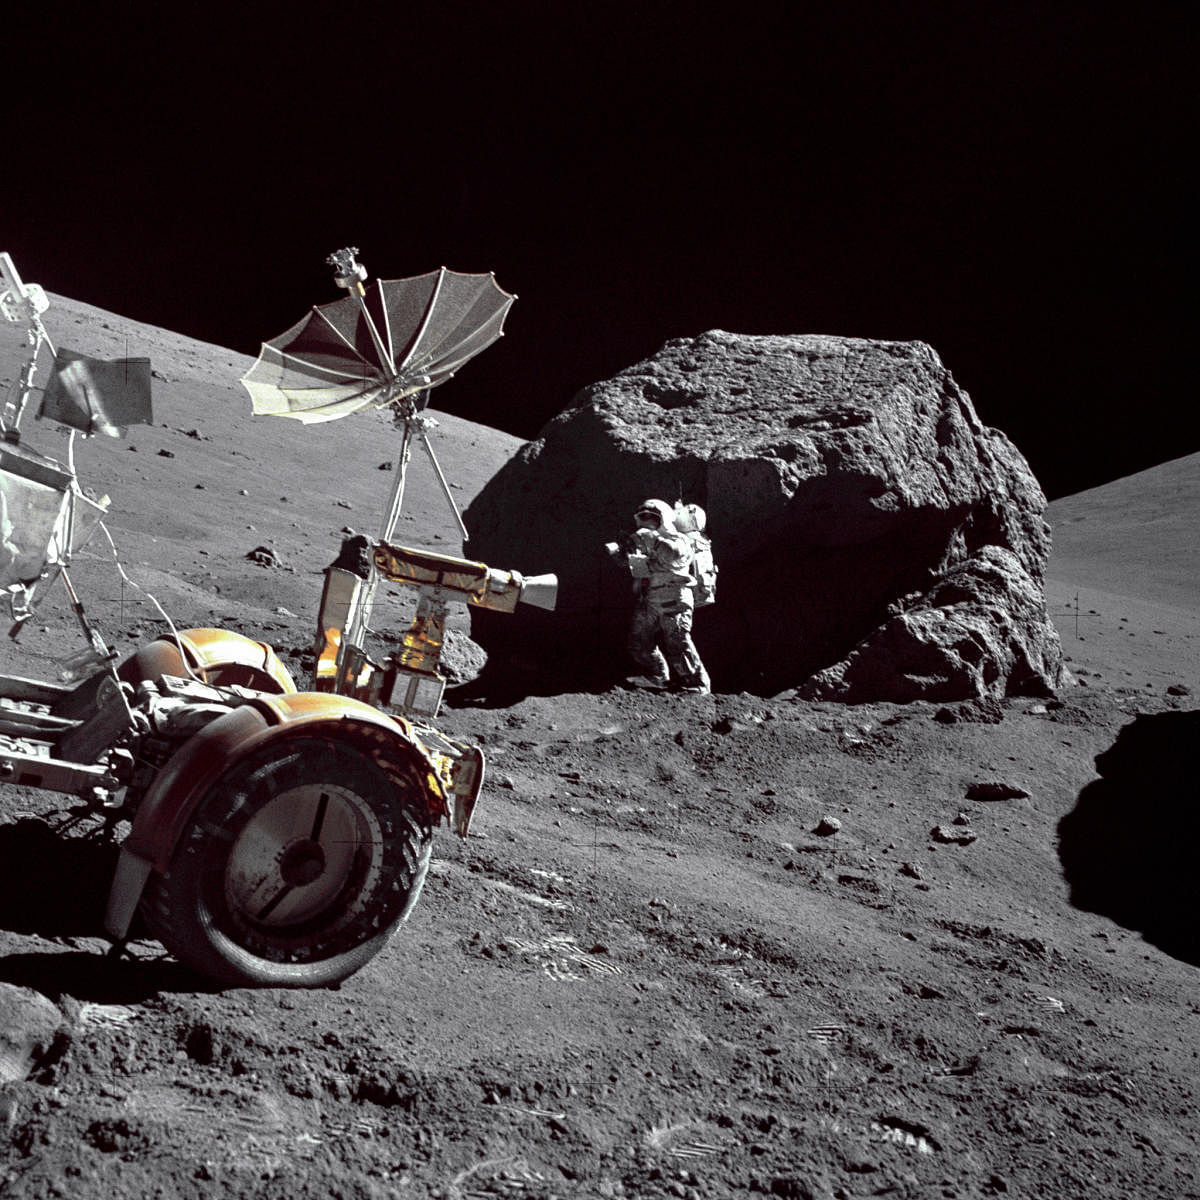 The past and future of lunar exploration